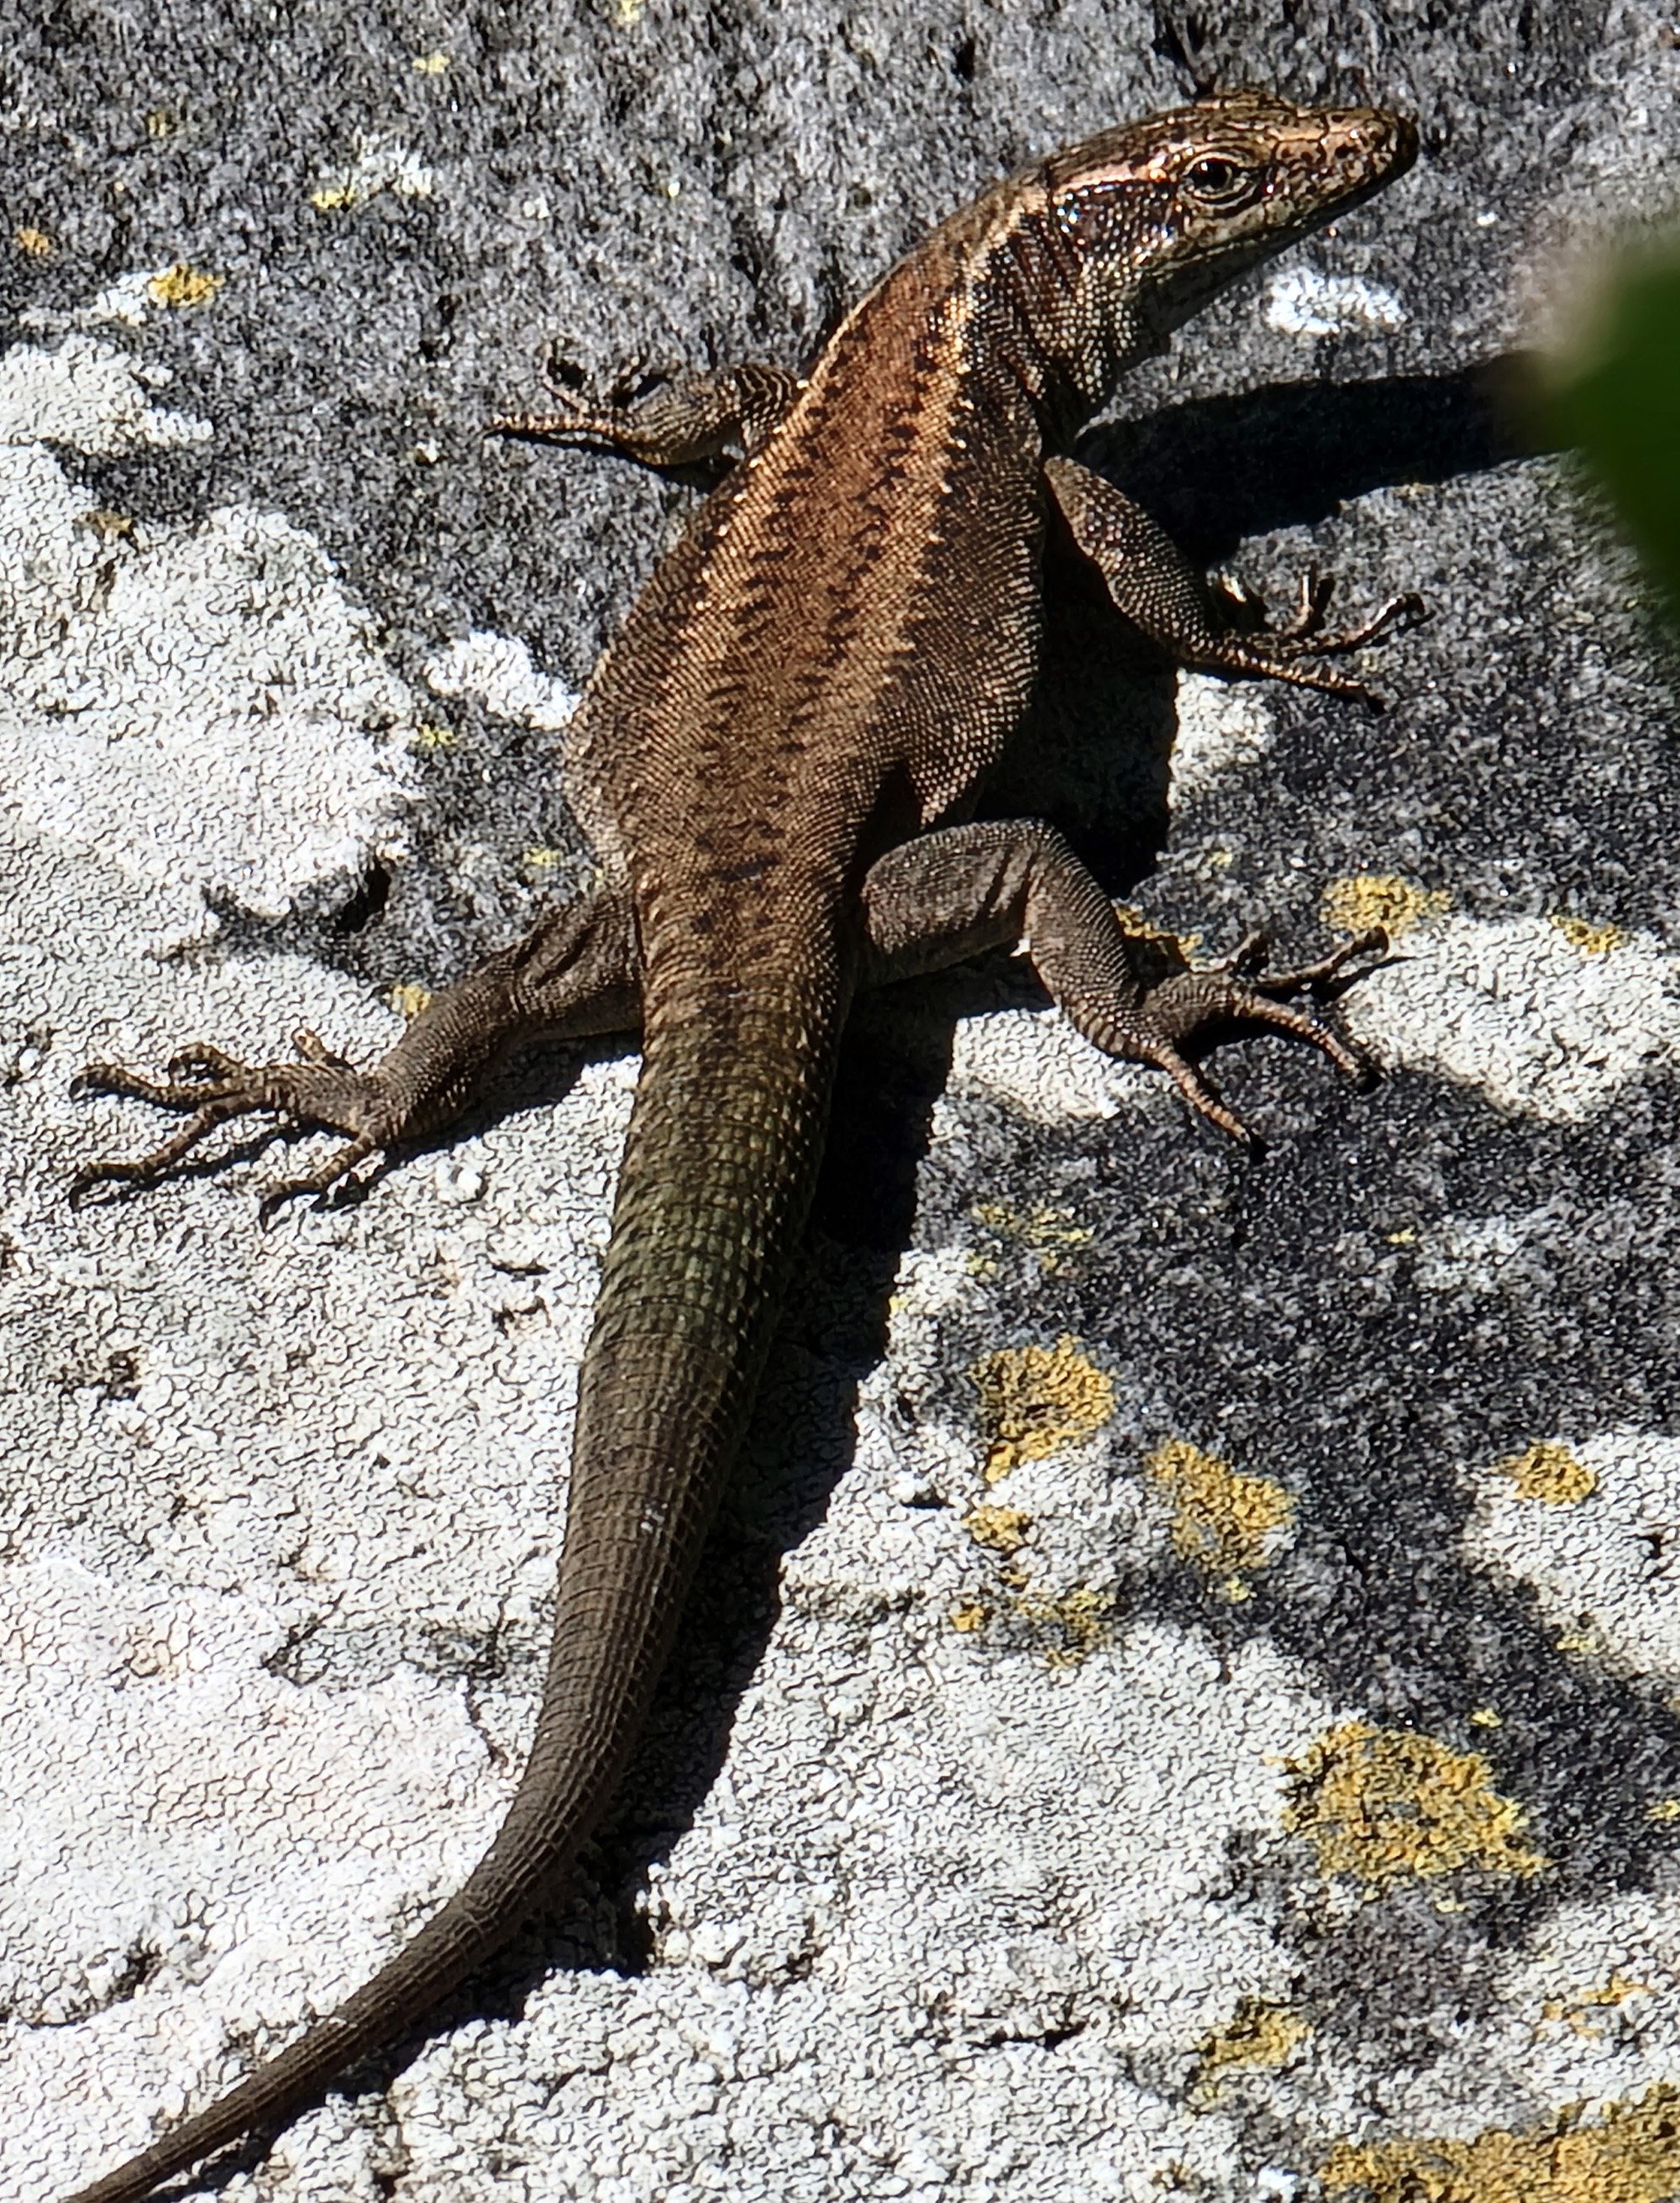 The island is infested with these tiny lizards who scurry into the bushes as you bike by. You hear leaves rustling all day.